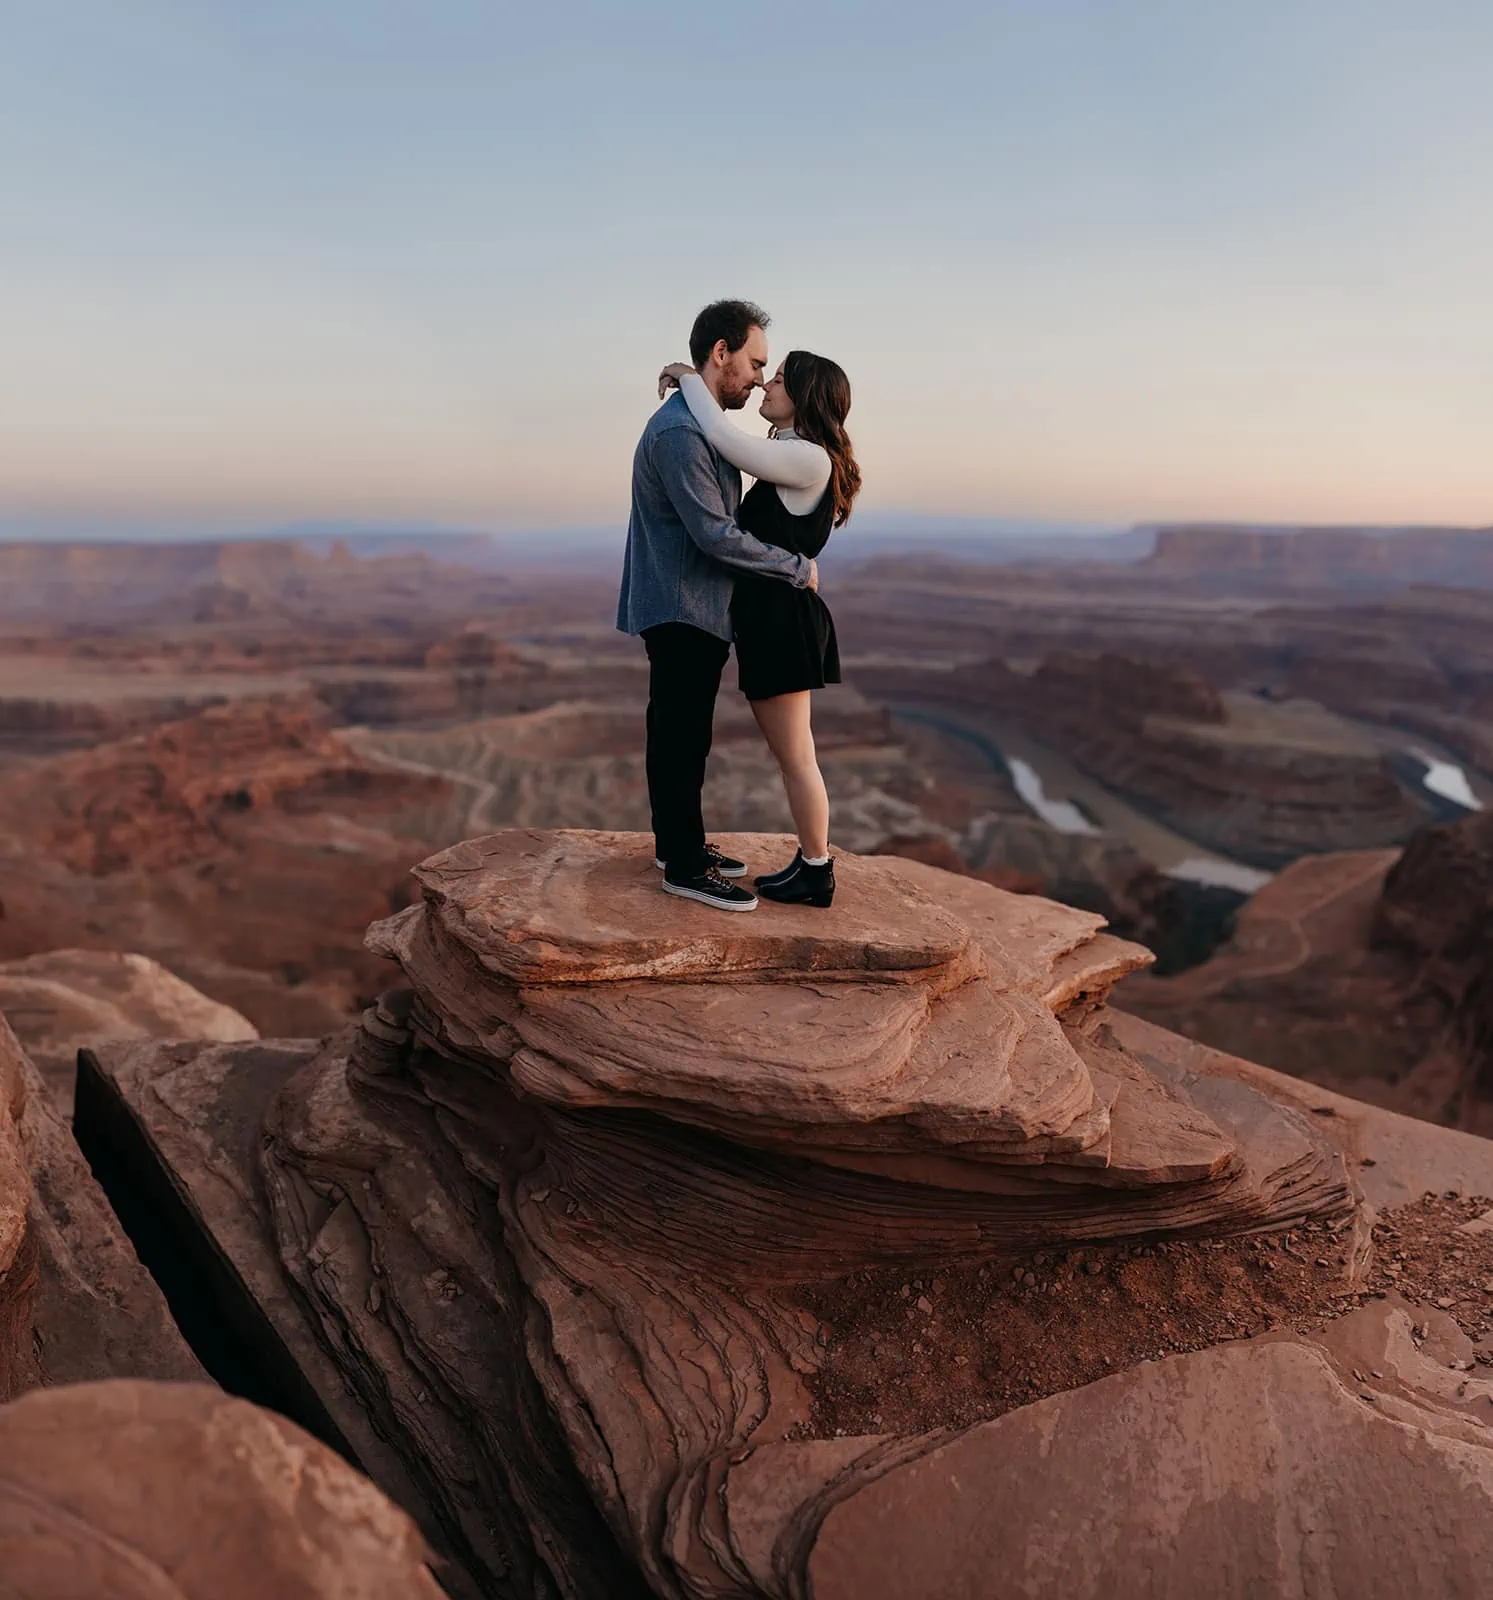 A man and woman share a kiss while up on a high vista ledge in Moab